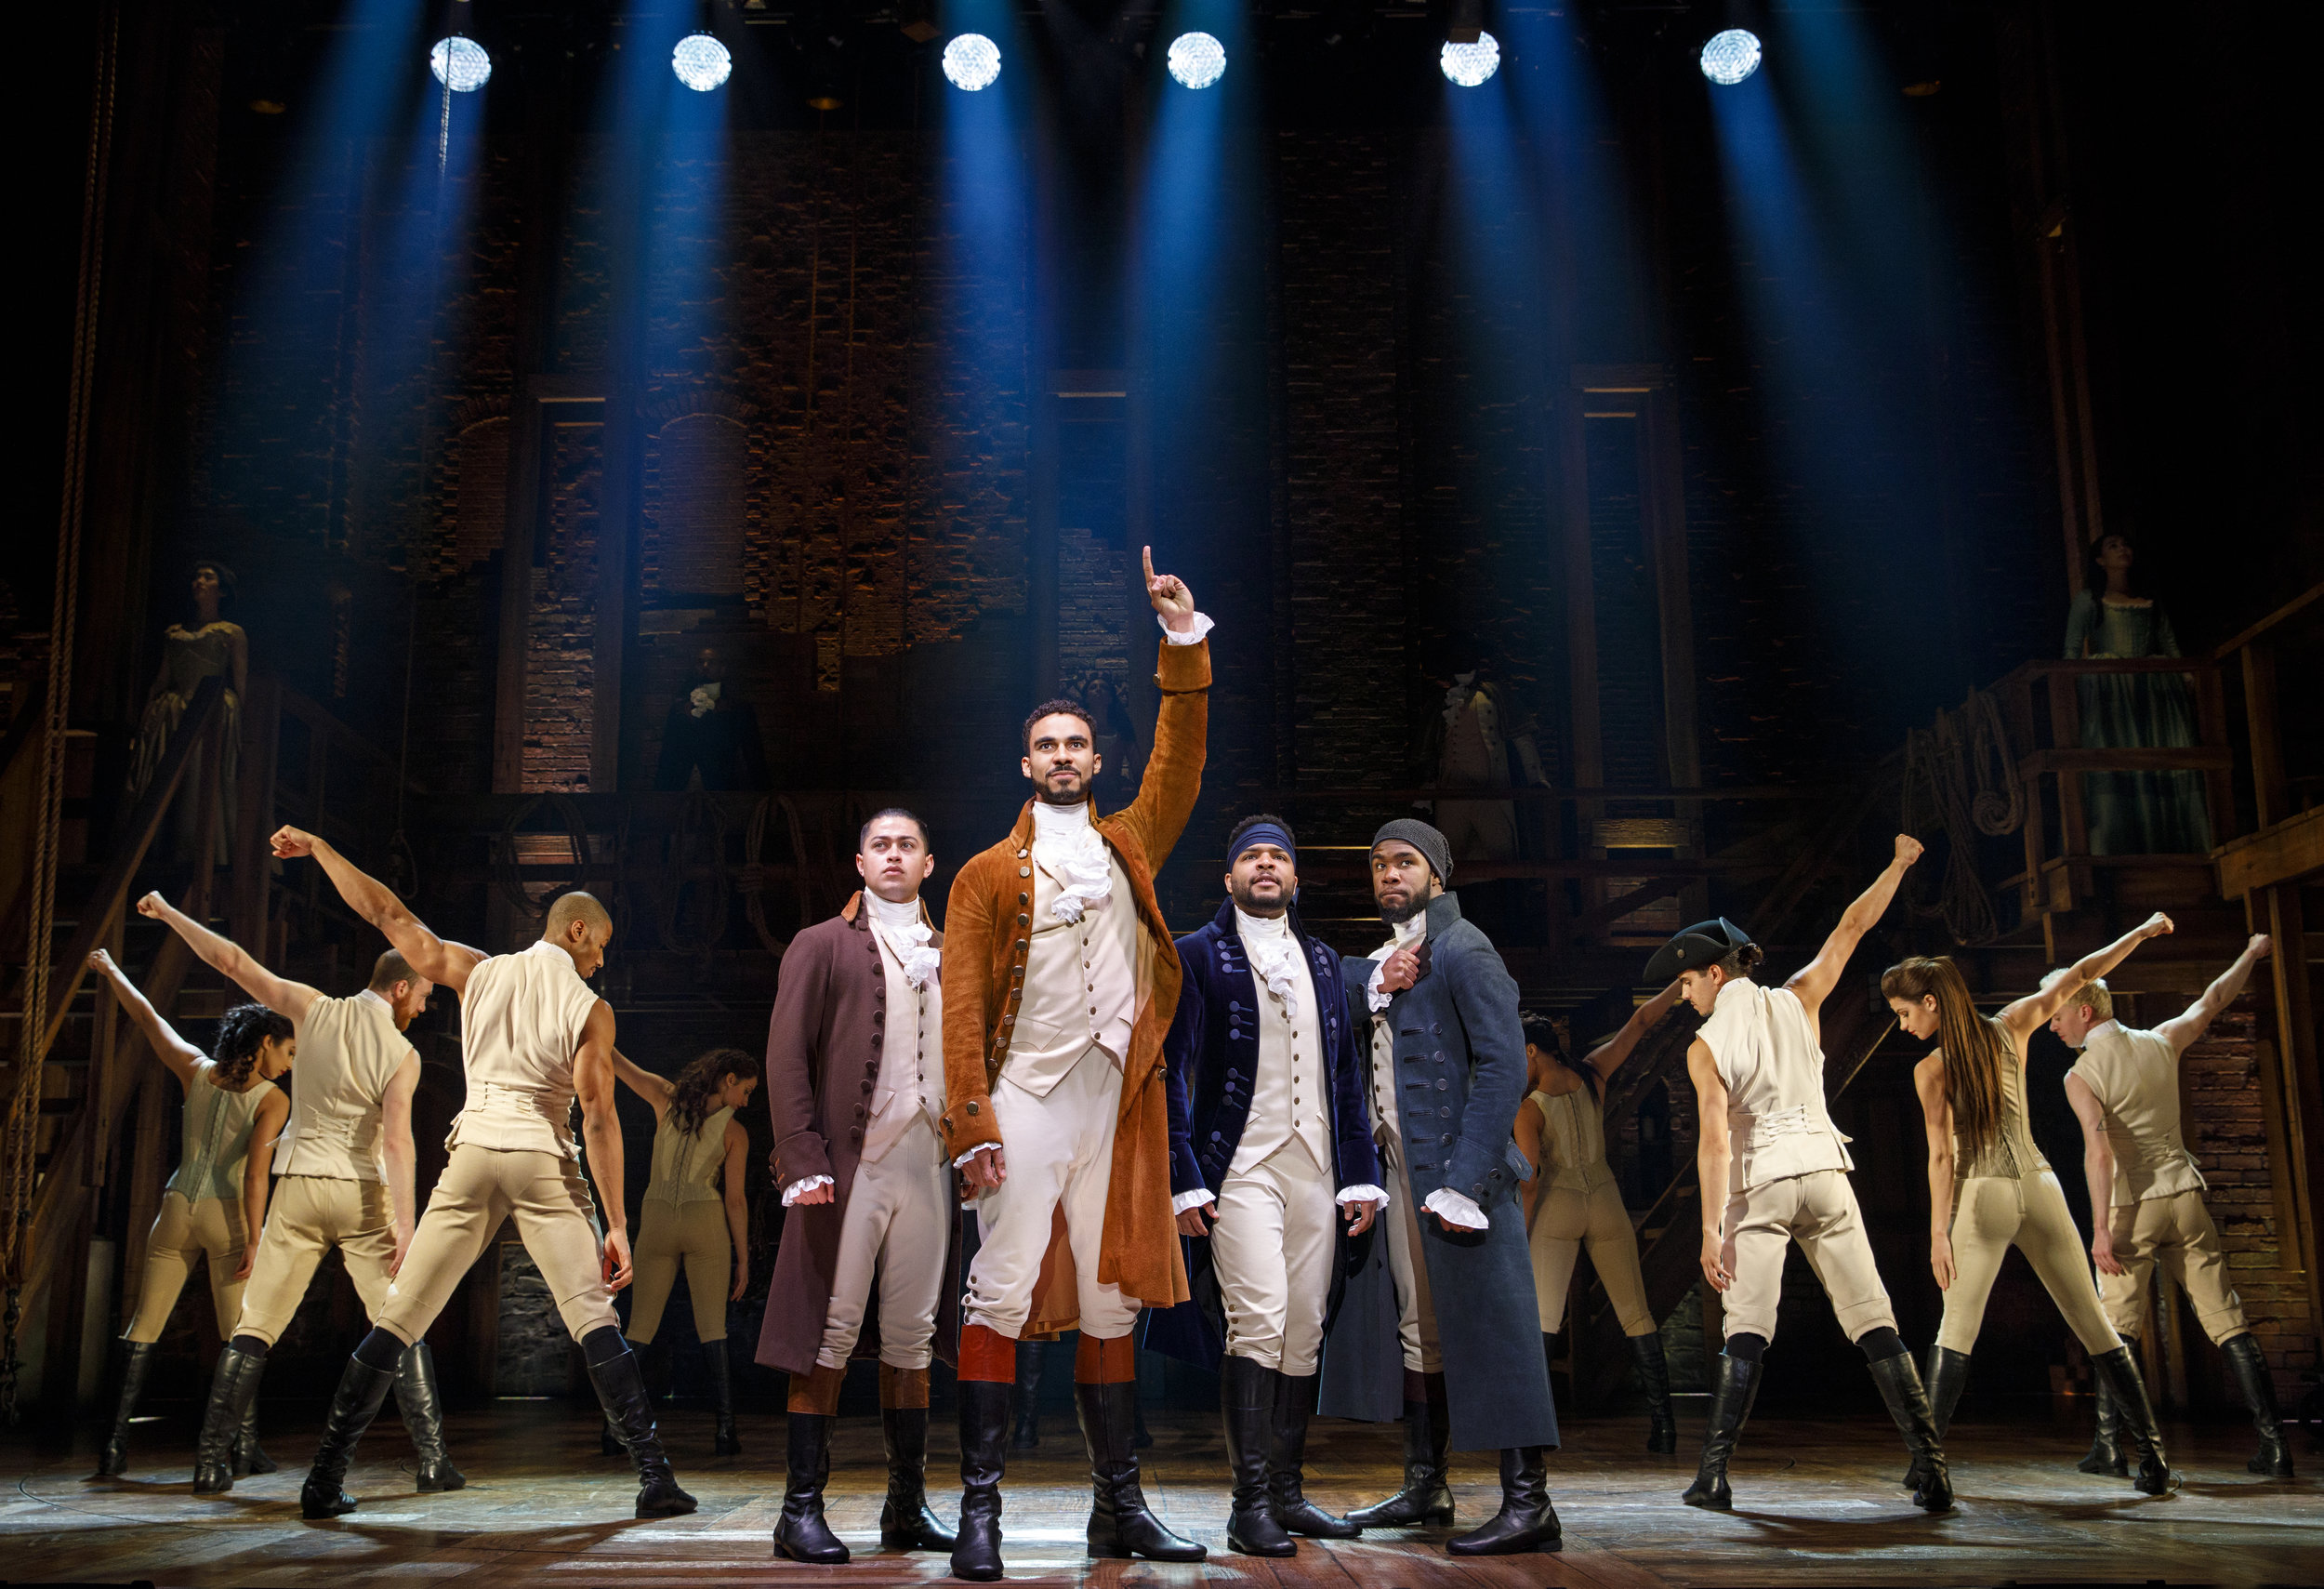 Hamilton delivers whether it’s opera Is not the pointBlog